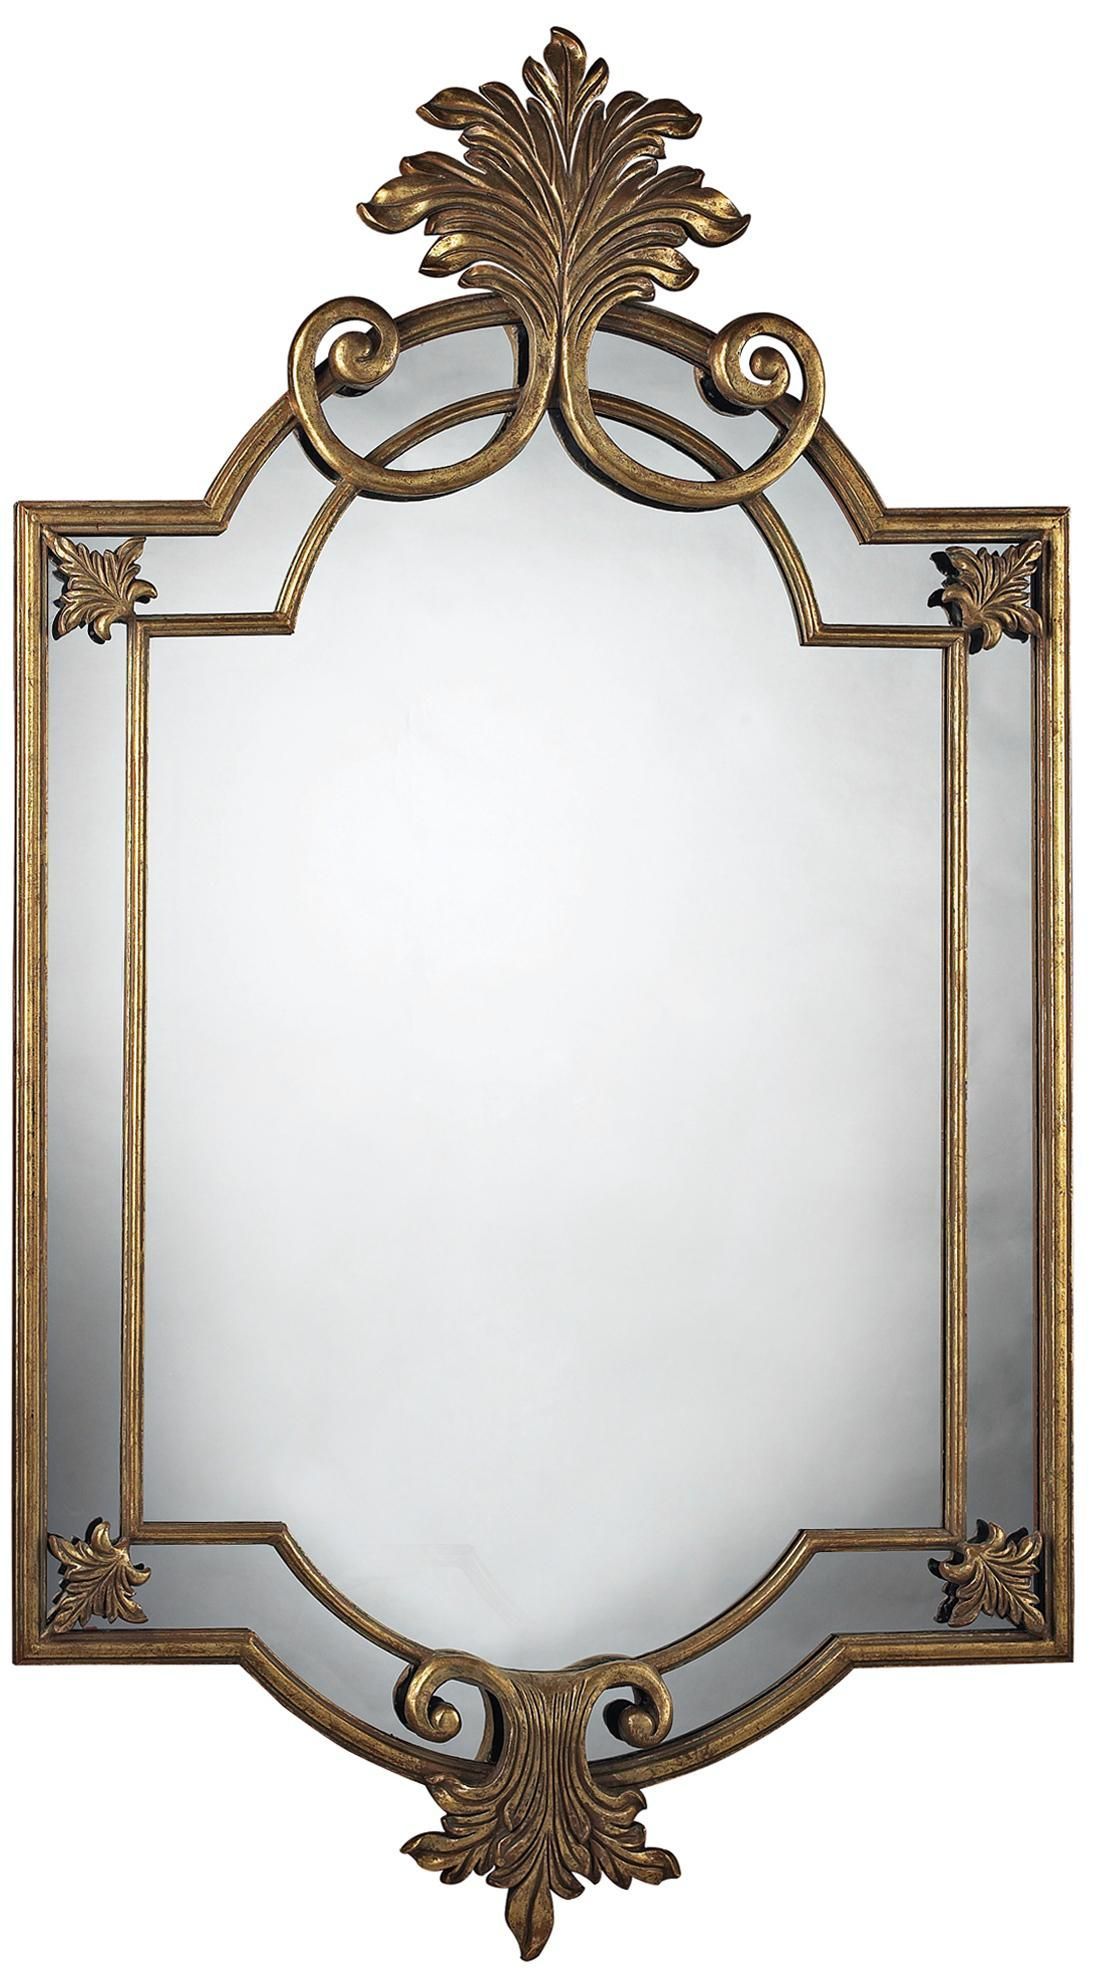 Gretna 60" High Gold Leaf Wall Mirror – #x7163 | Lamps Plus | Mirror Within High Wall Mirrors (View 8 of 15)